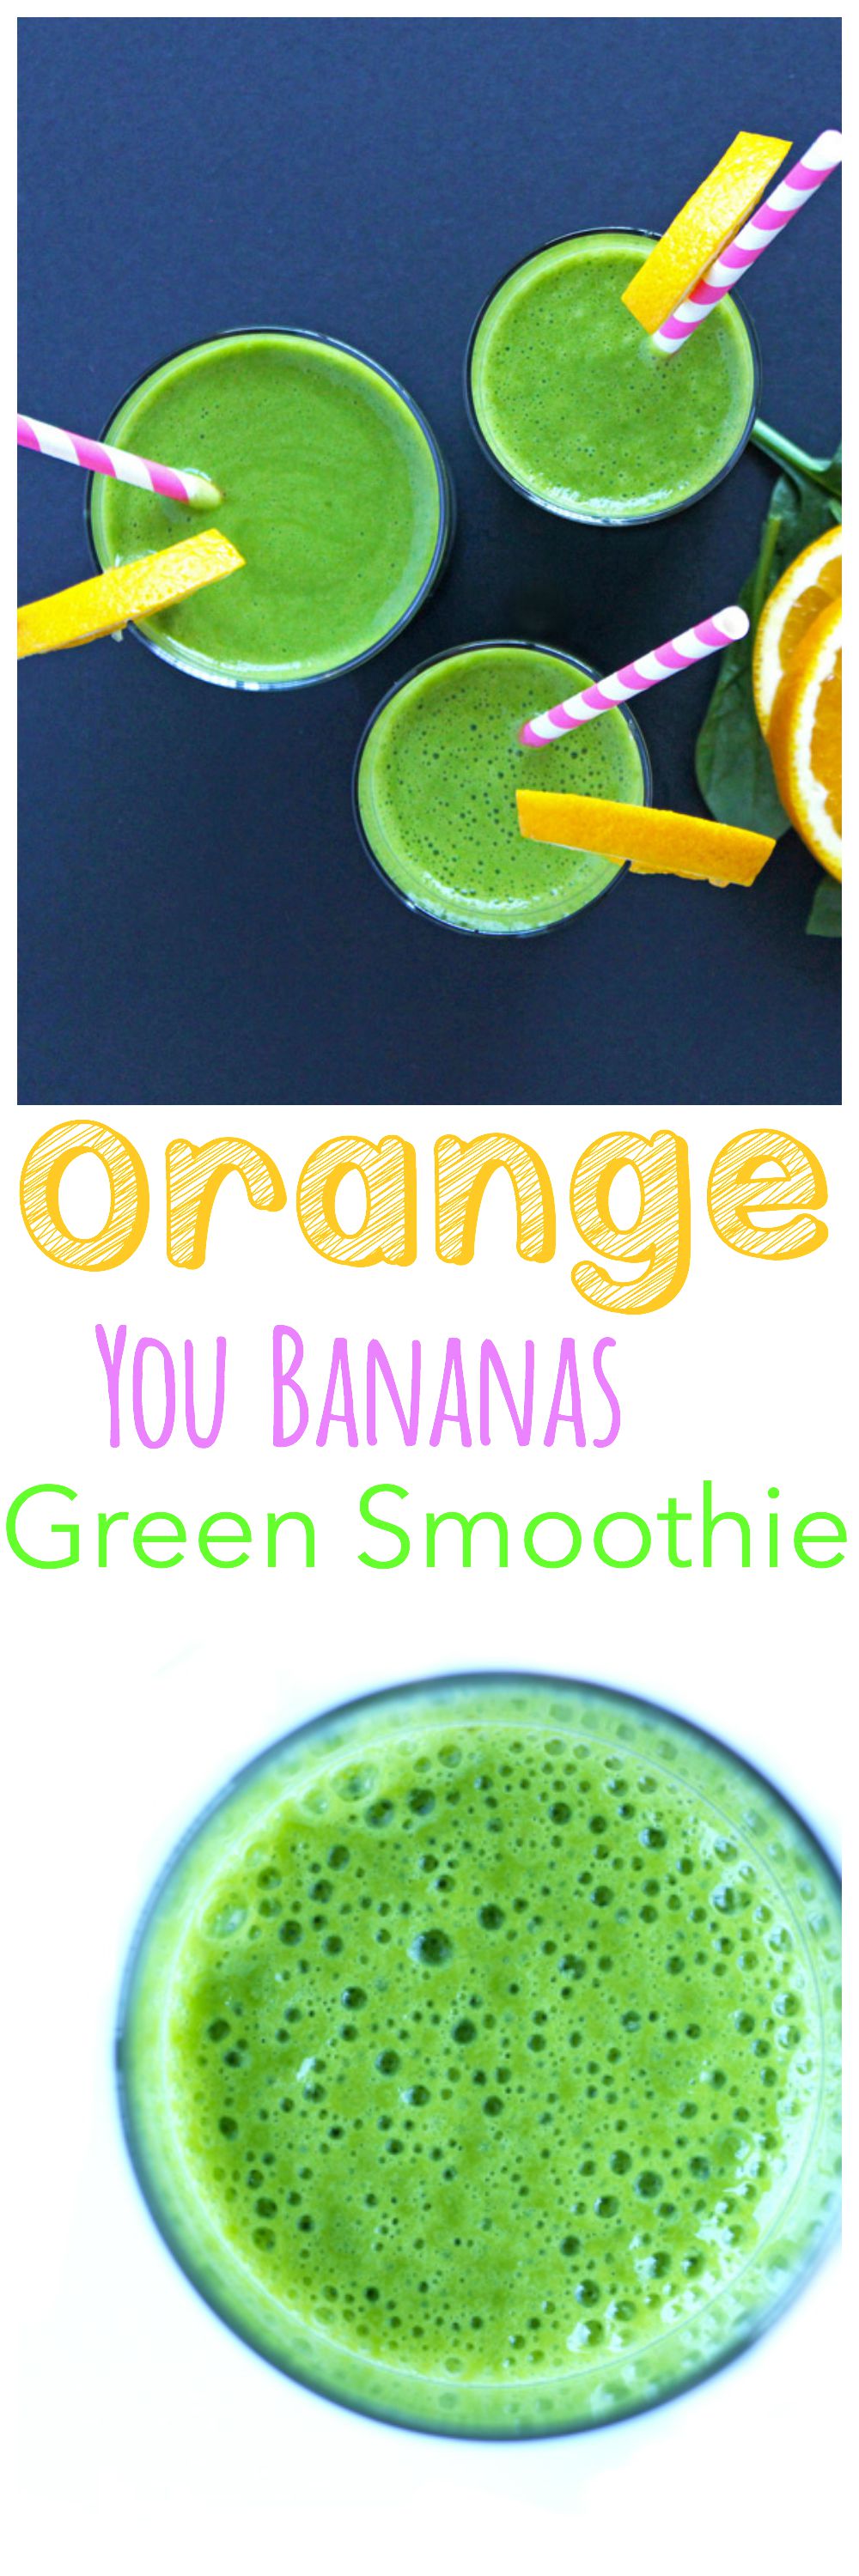 Orange You Bananas Green Smoothie. A revitalizing smoothie loaded with vitamin C, antioxidants, has a smooth texture and sweet flavor. A sure smoothie hit! neurotic mommy.com